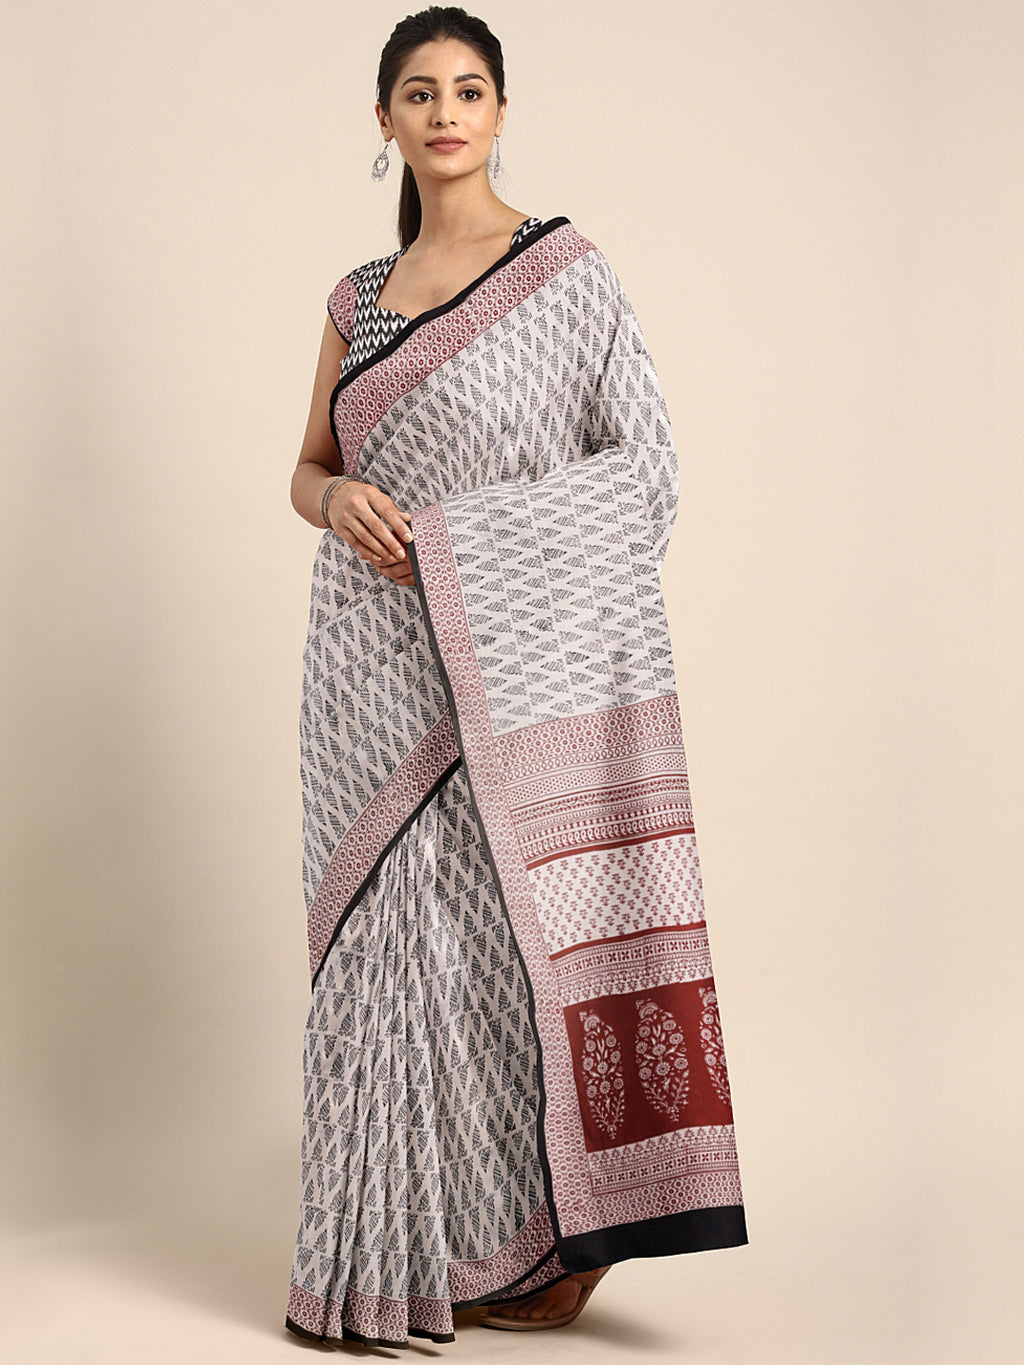 White and Maroon, Kalakari India Beige & Black Printed Bagh Saree ZIBASA0102-Saree-Kalakari India-ZIBASA0102-Bagh, Cotton, Geographical Indication, Hand Crafted, Heritage Prints, Natural Dyes, Red, Sarees, Sustainable Fabrics, Woven, Yellow-[Linen,Ethnic,wear,Fashionista,Handloom,Handicraft,Indigo,blockprint,block,print,Cotton,Chanderi,Blue, latest,classy,party,bollywood,trendy,summer,style,traditional,formal,elegant,unique,style,hand,block,print, dabu,booti,gift,present,glamorous,affordable,col